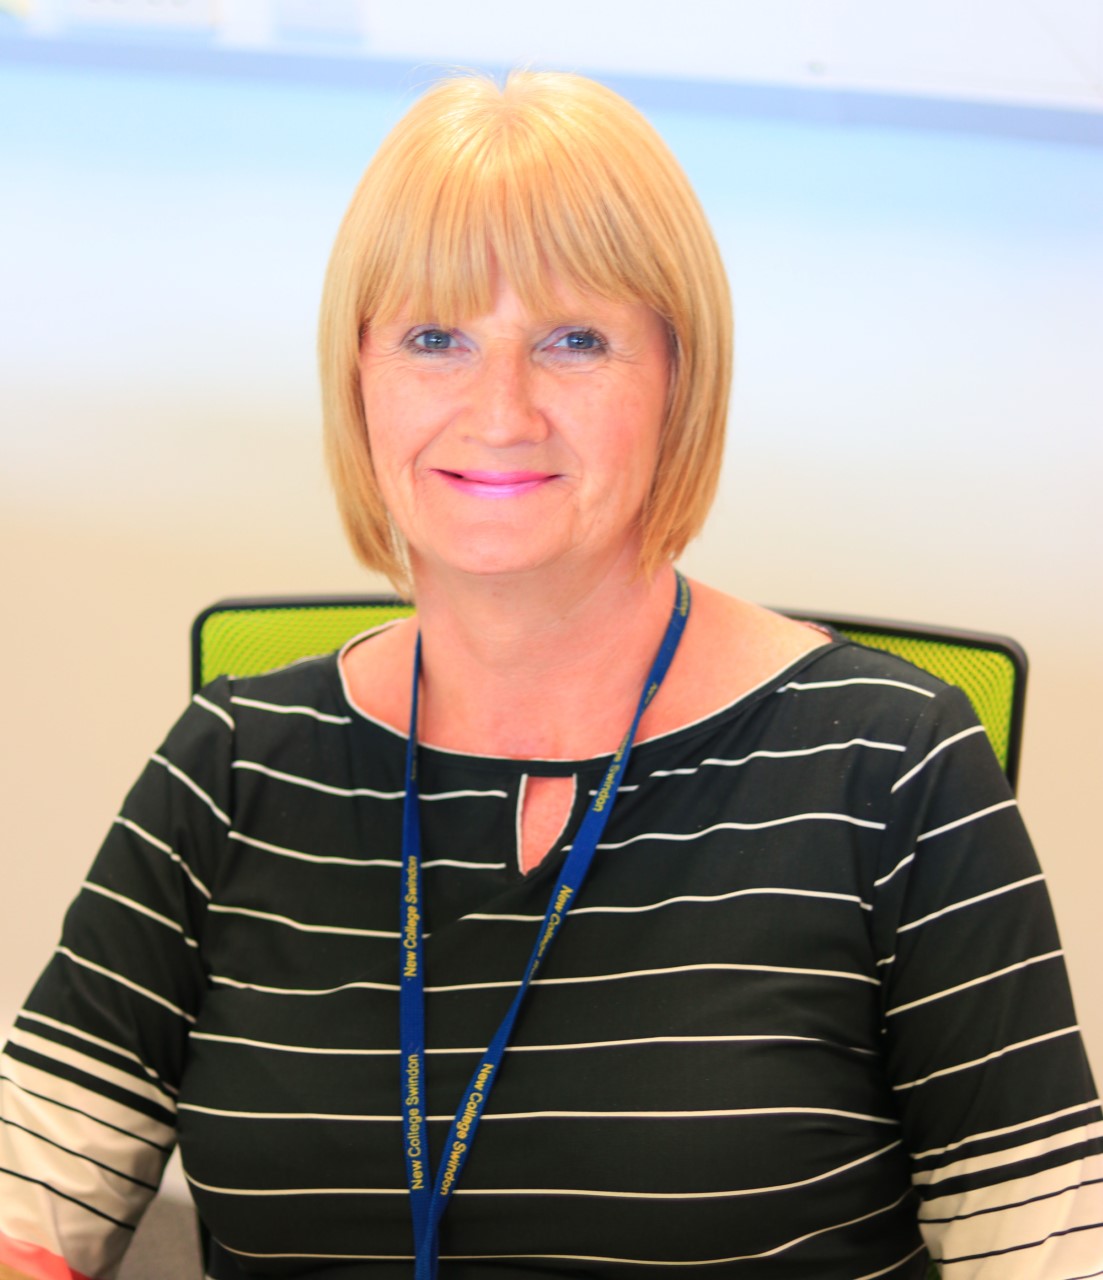 TGt Meets...Sharon, New College's Apprenticeship Manager